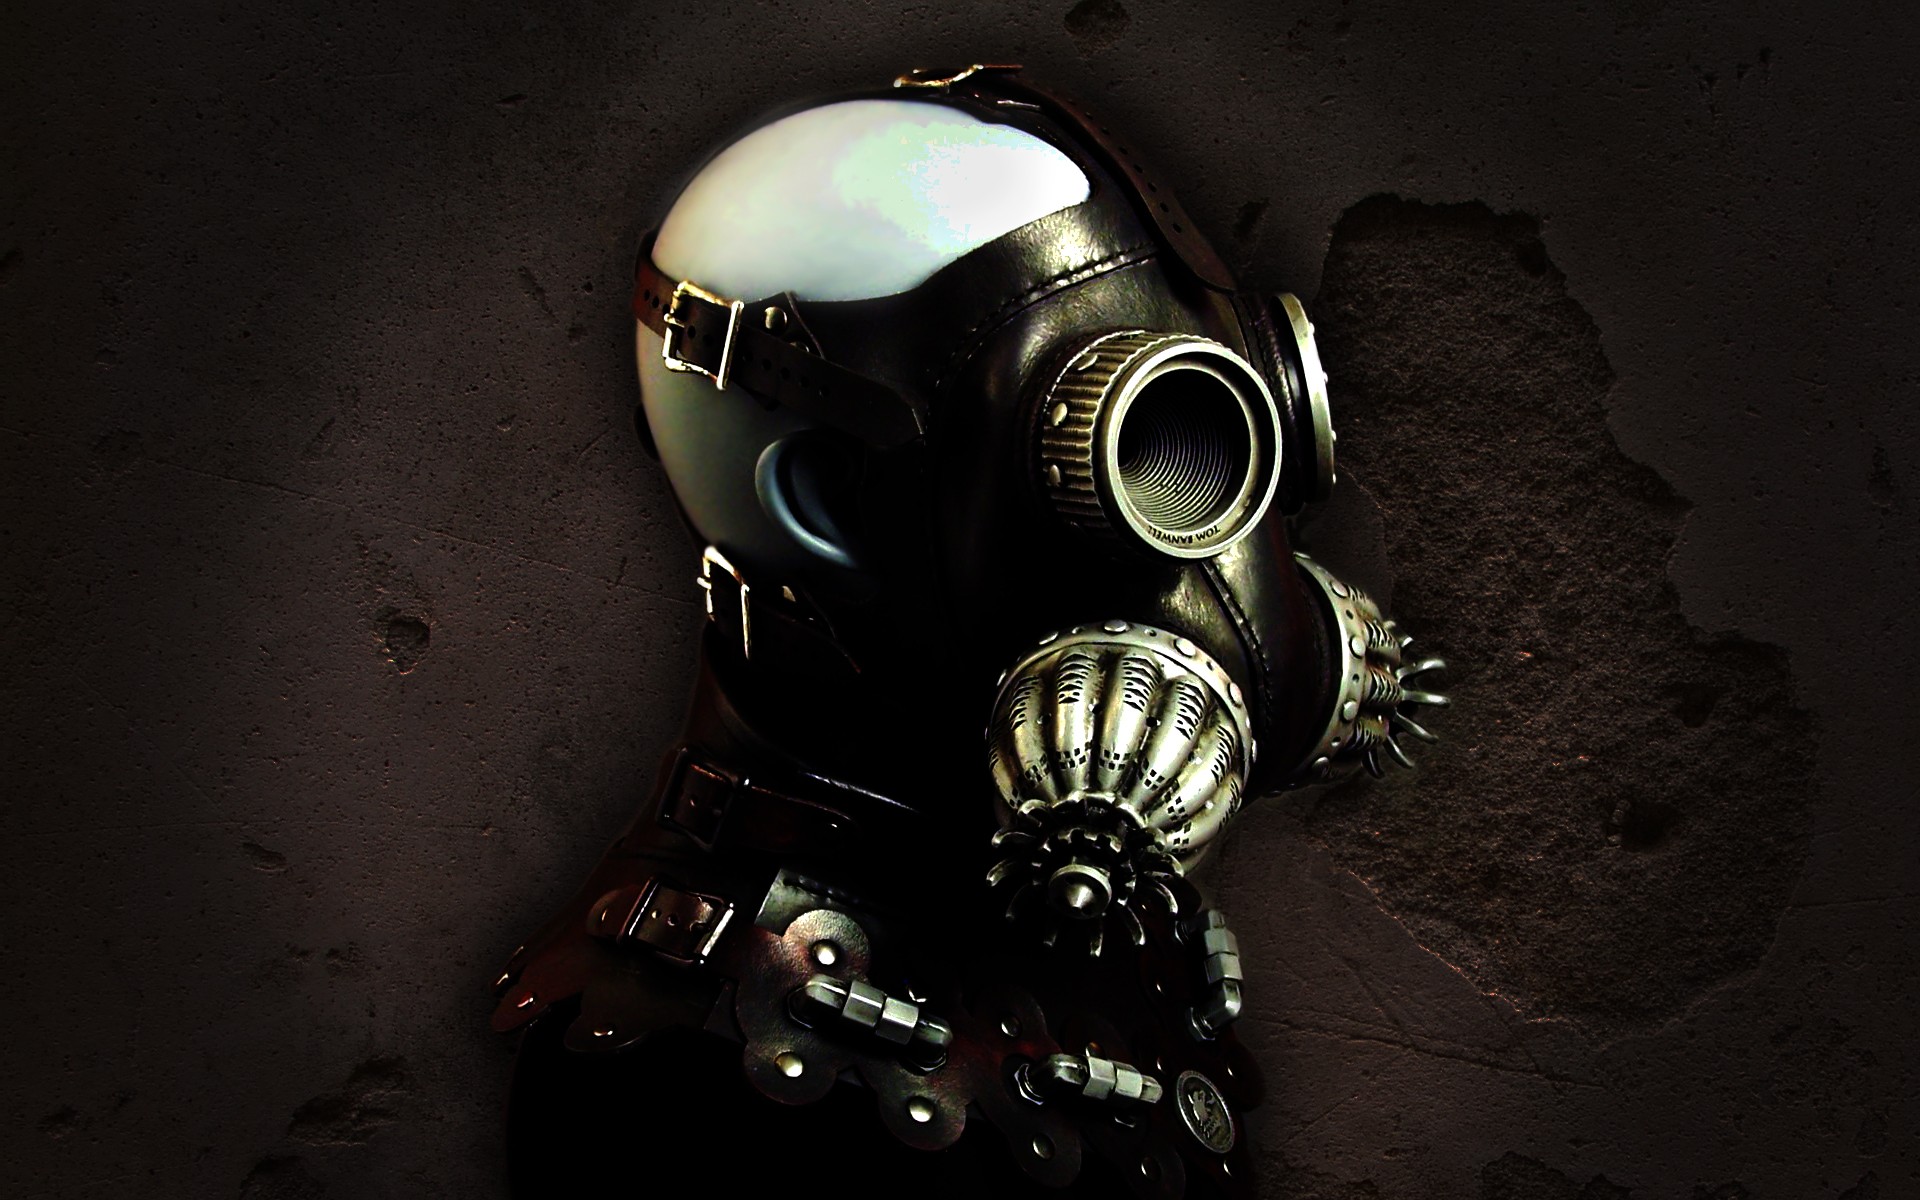 gas mask wallpaper,gas mask,personal protective equipment,mask,costume,headgear